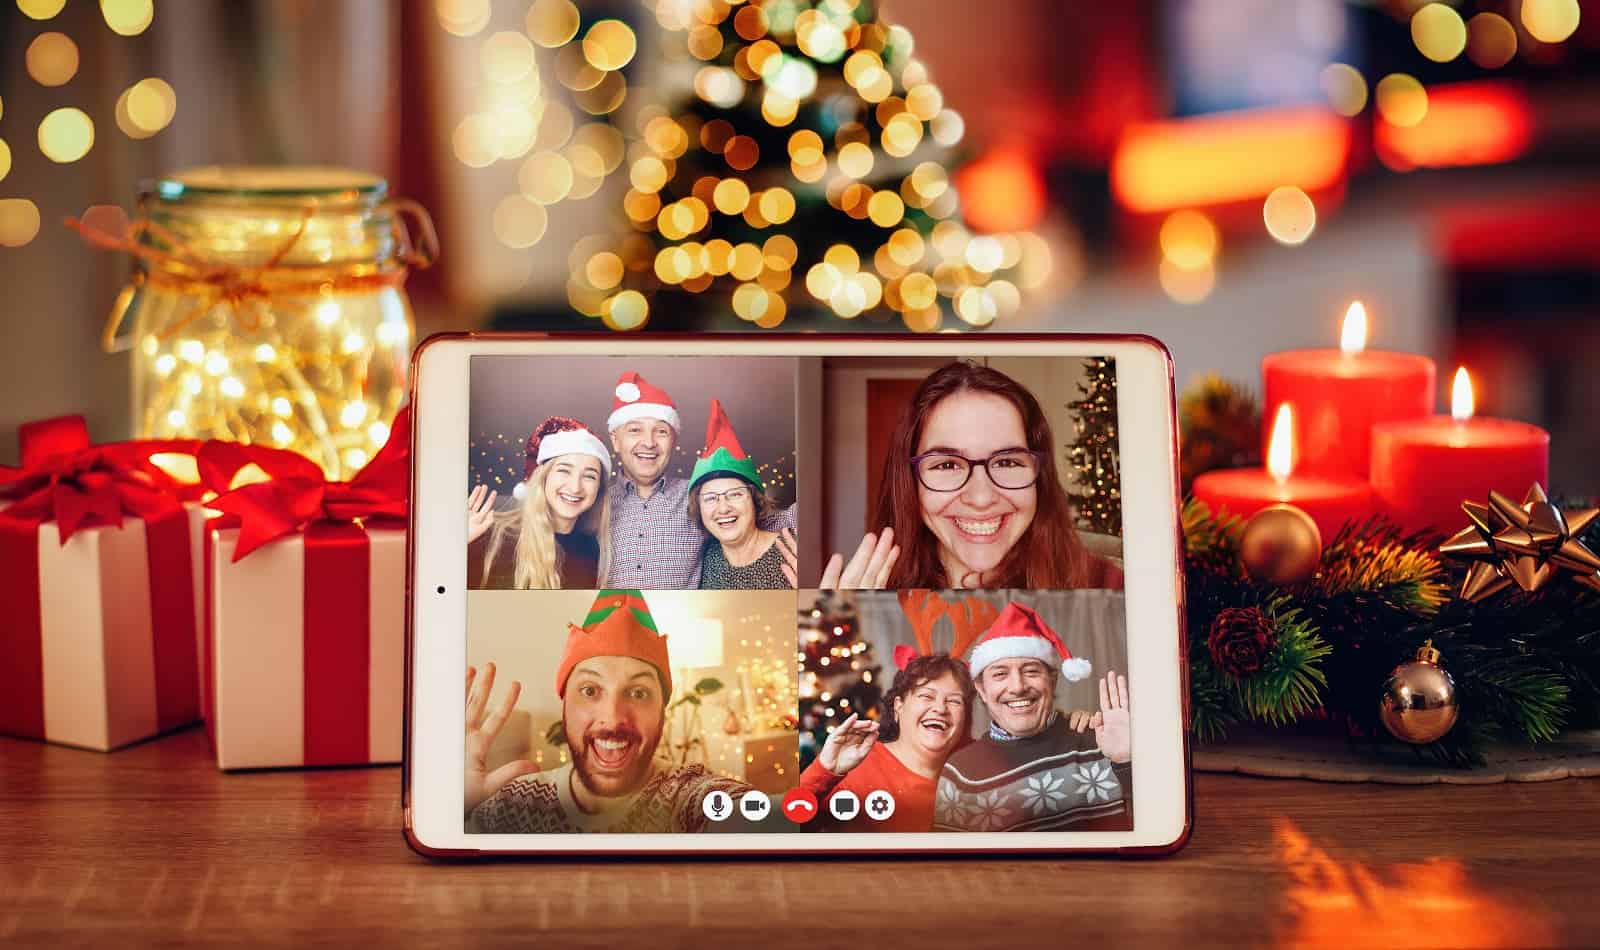 Think Christmas is cancelled just because you can't get together with family in person? Think again! Check out 5 tips to have an amazing virtual holiday celebration this year. 